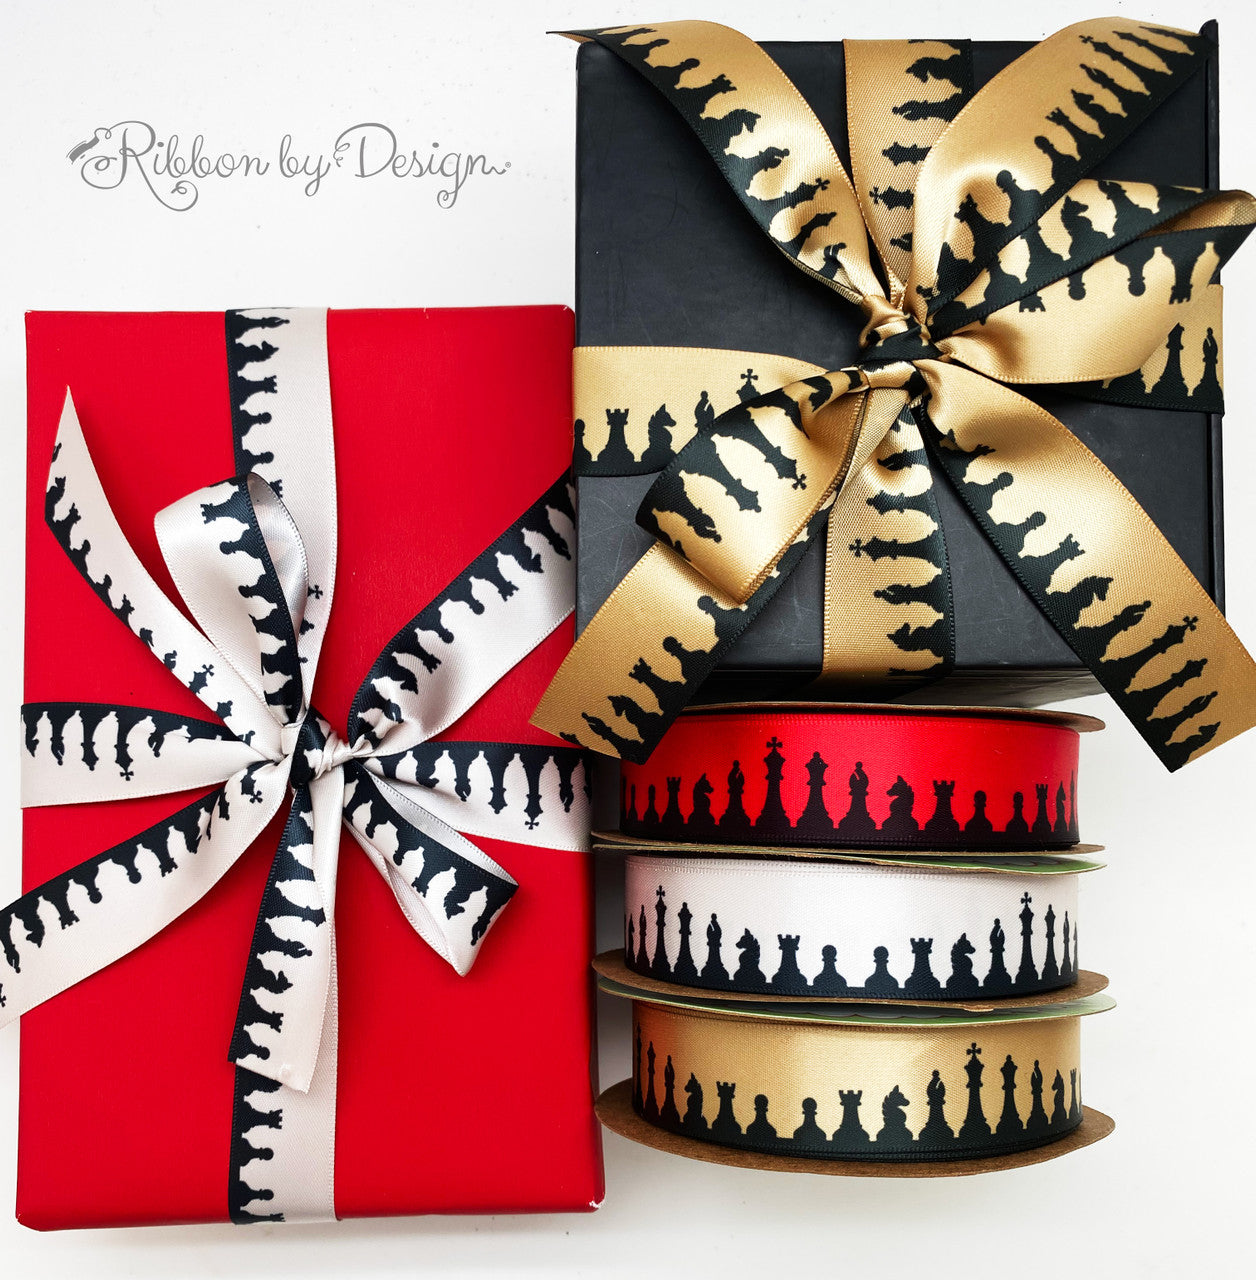 Make a statement with your gift wrap for your favorite chess player using our chess themed ribbons!